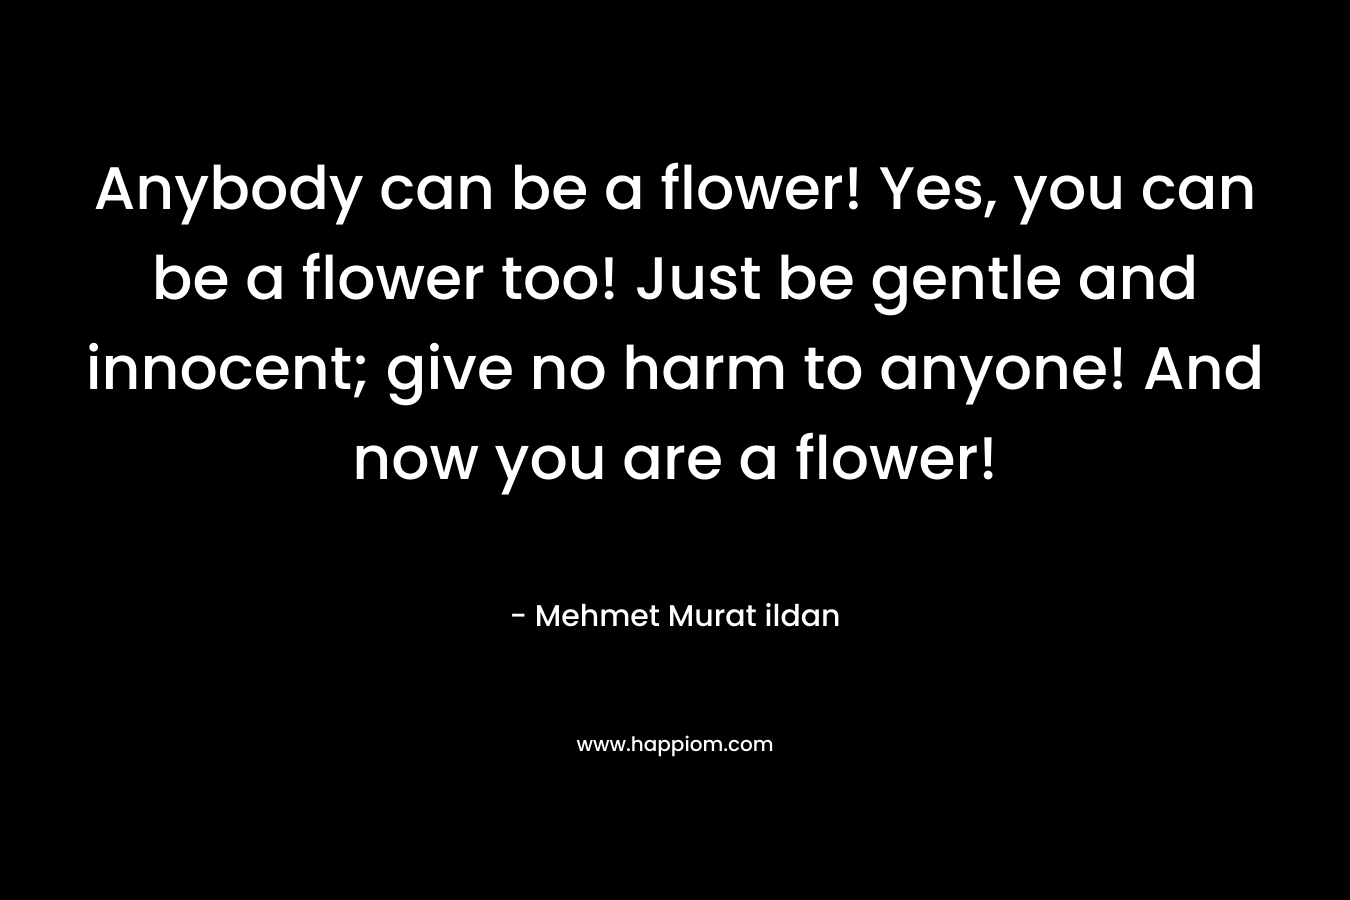 Anybody can be a flower! Yes, you can be a flower too! Just be gentle and innocent; give no harm to anyone! And now you are a flower! – Mehmet Murat ildan